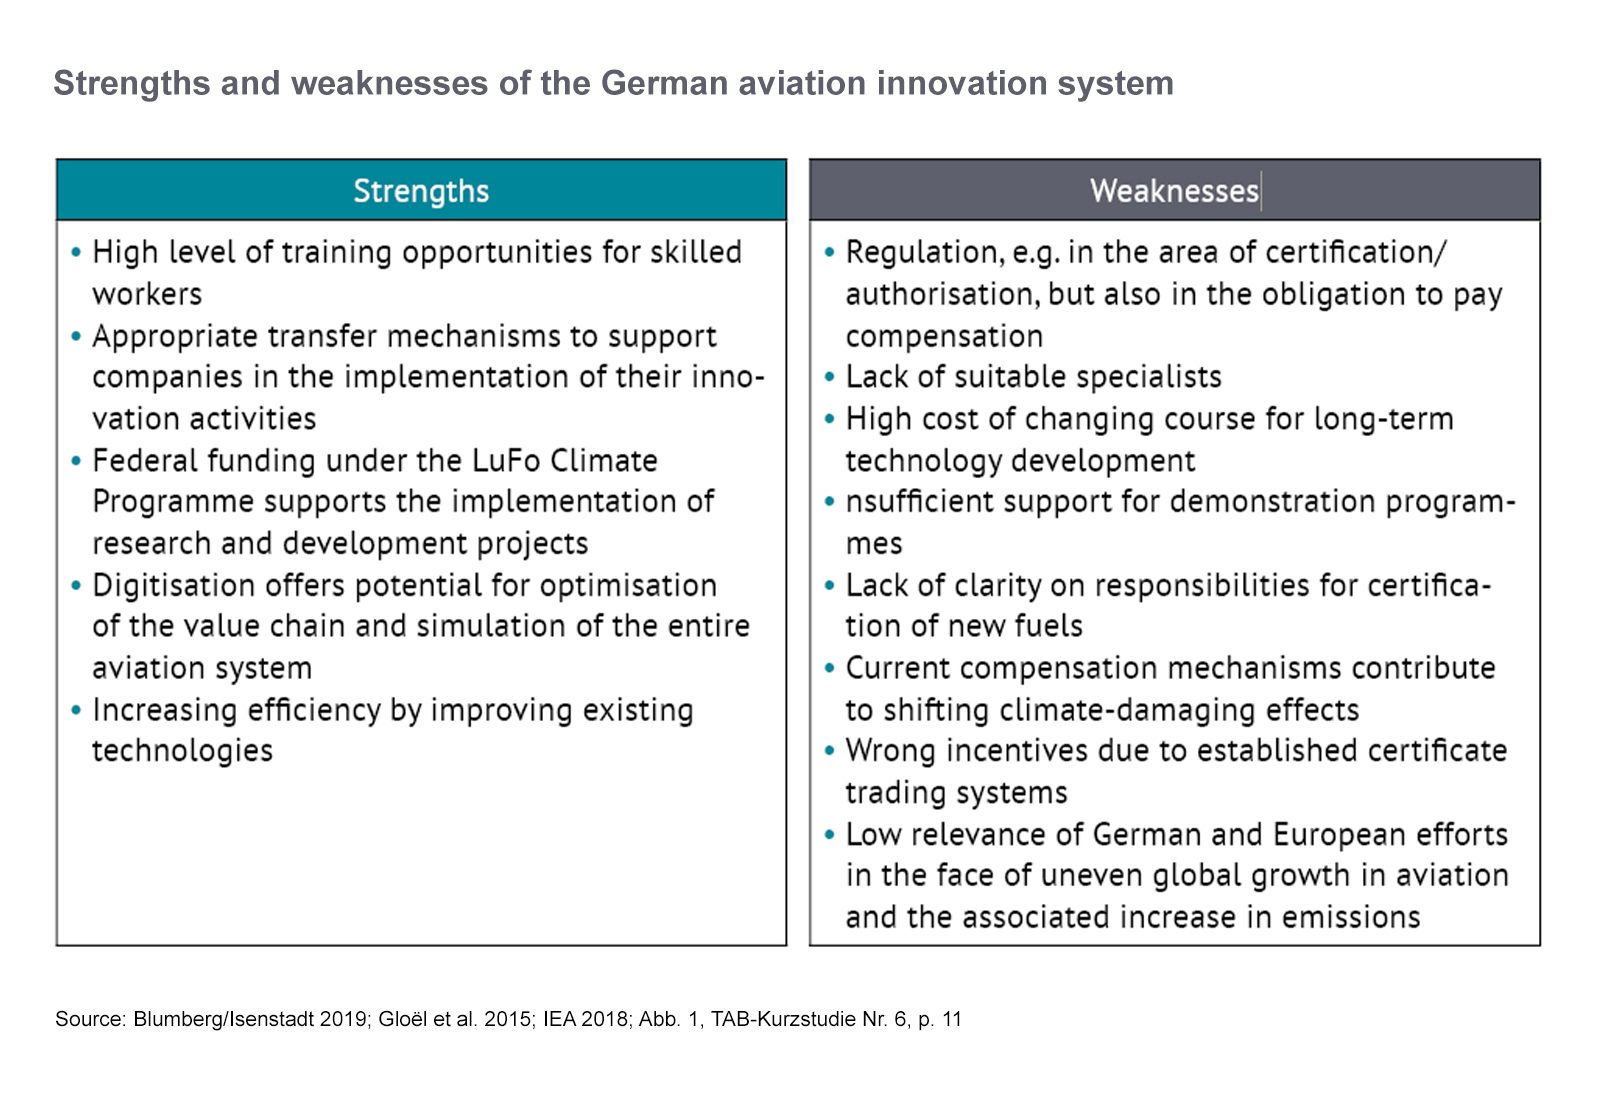 Figure: Strengths and weaknesses of the German aviation innovation system. The table provides an overview of the most important positive and negative characteristics of the German aviation innovation system.